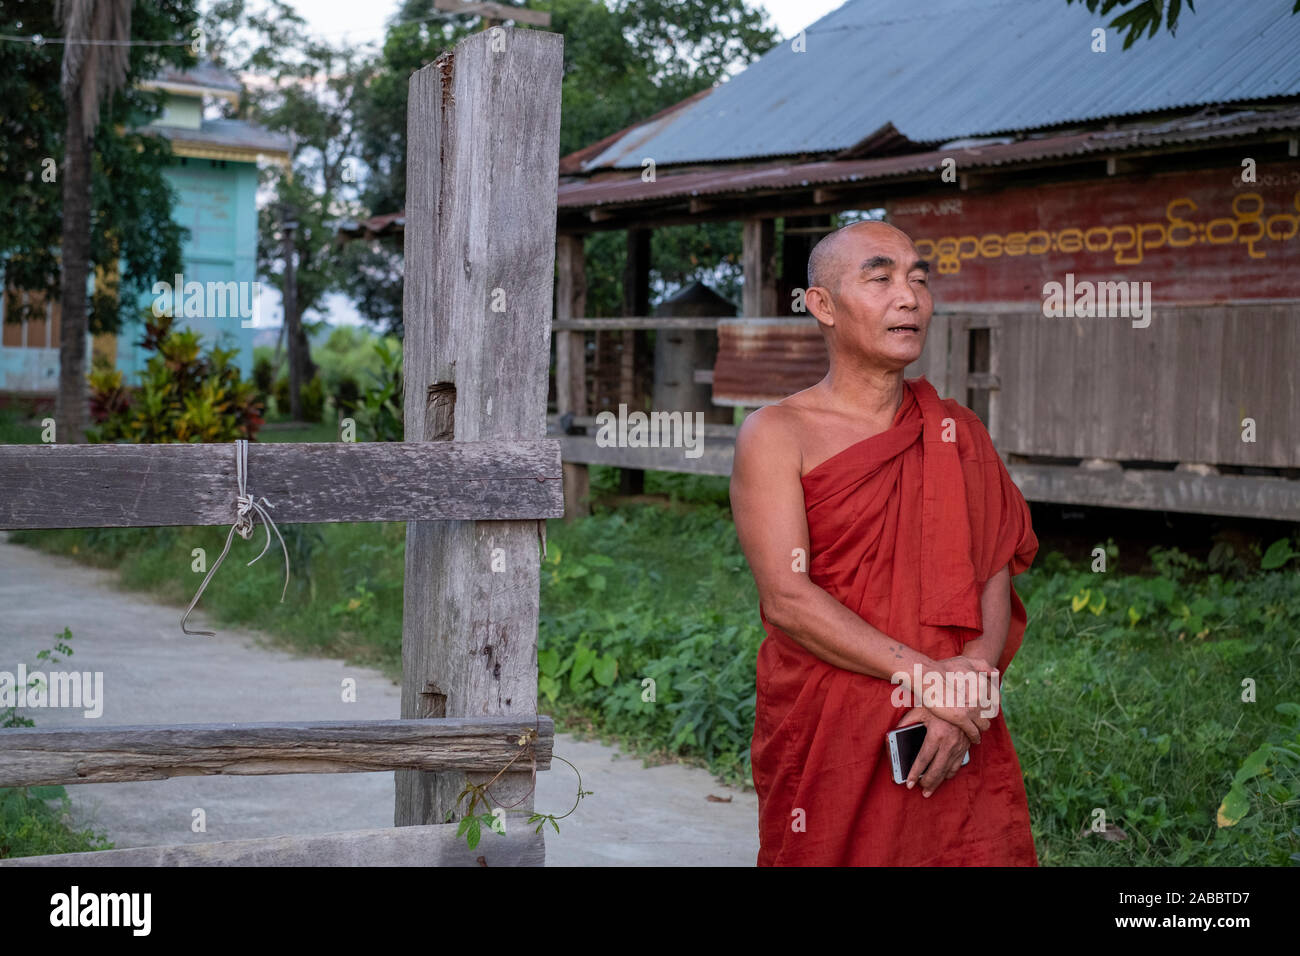 An older Buddhist monk in a scarlet robe stands in front of his monastery in a rural village along the Chindwin River in northwestern Myanmar (Burma) Stock Photo